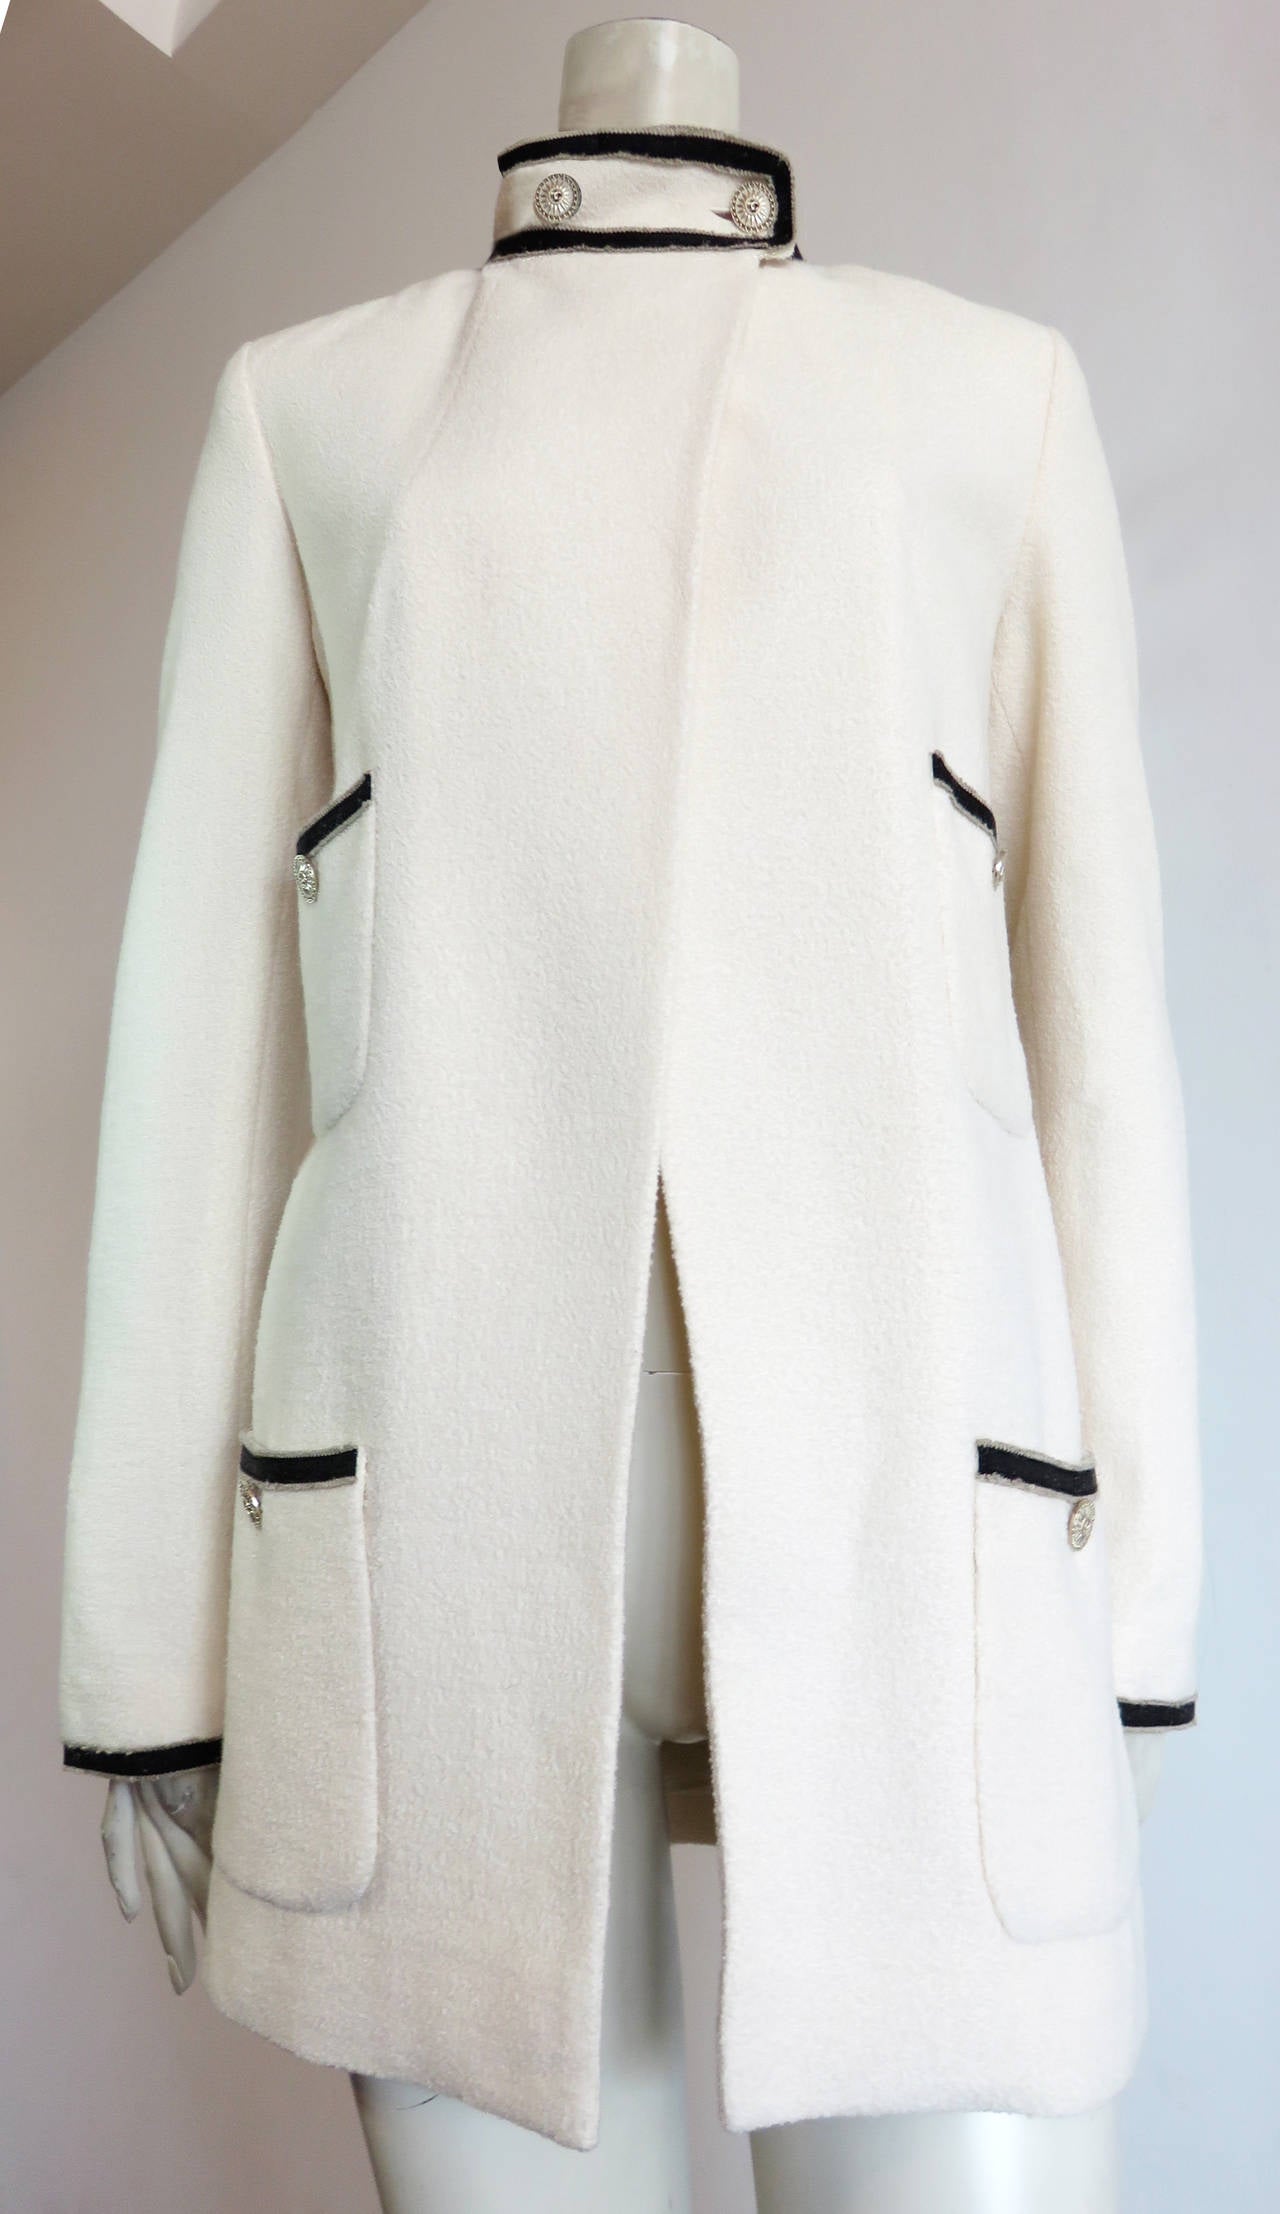 Worn once, CHANEL PARIS ivory, silk & wool bouclé coat.

This excellent condition coat features an open front design that buttons down at the banded collar neck.  

The engraved metal buttons feature 'CC' sunburst style logos with silver metal